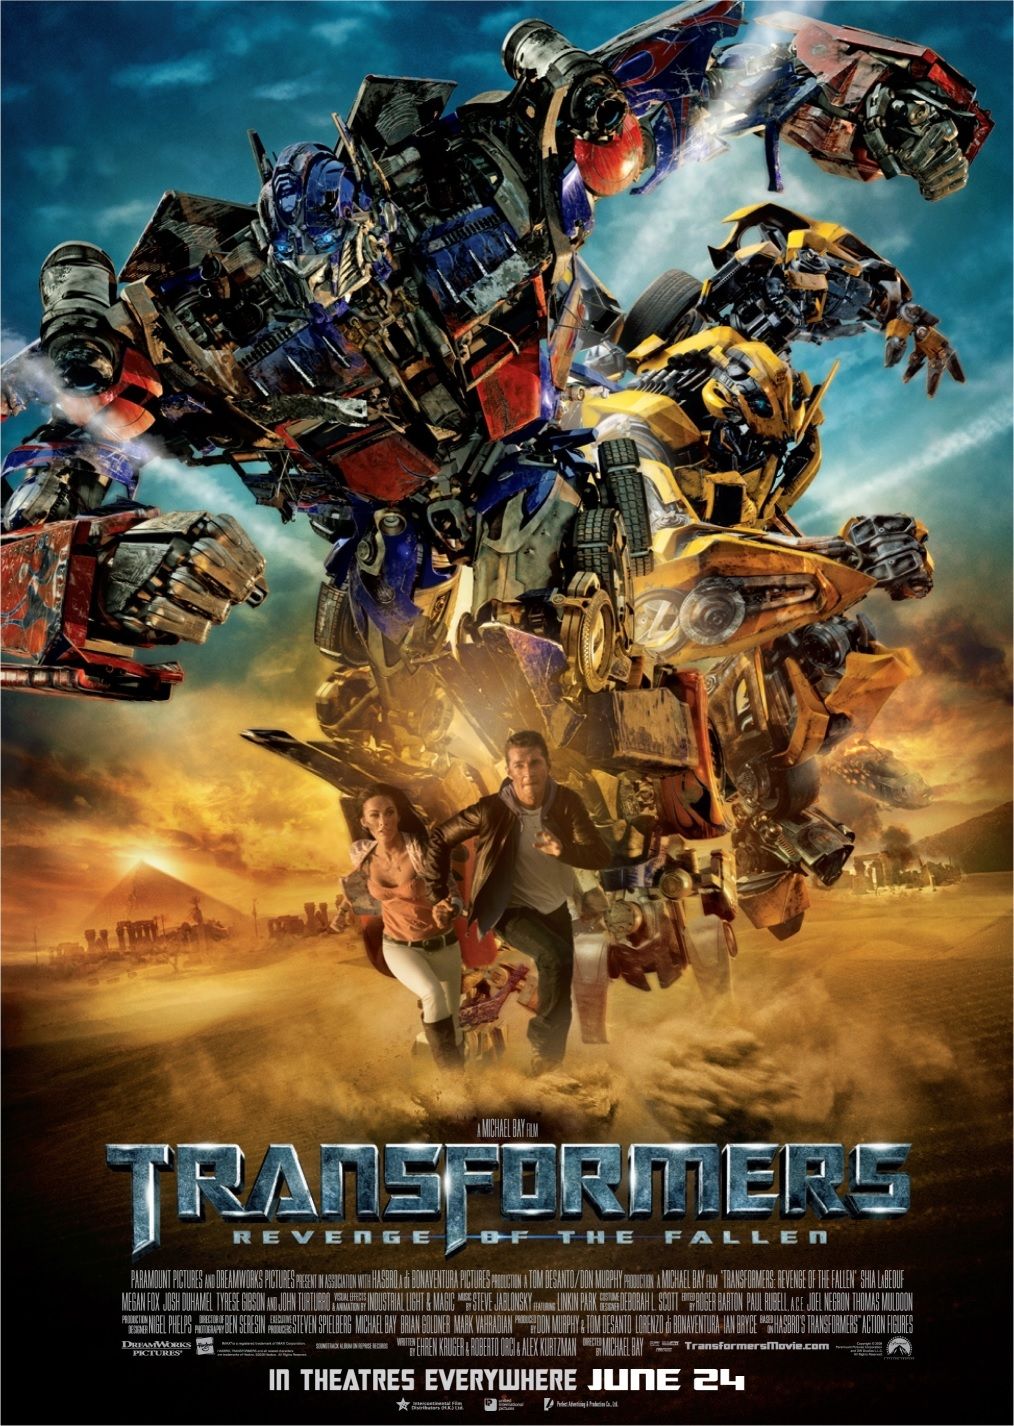 You are currently viewing Notes On A Film: Transformers 2